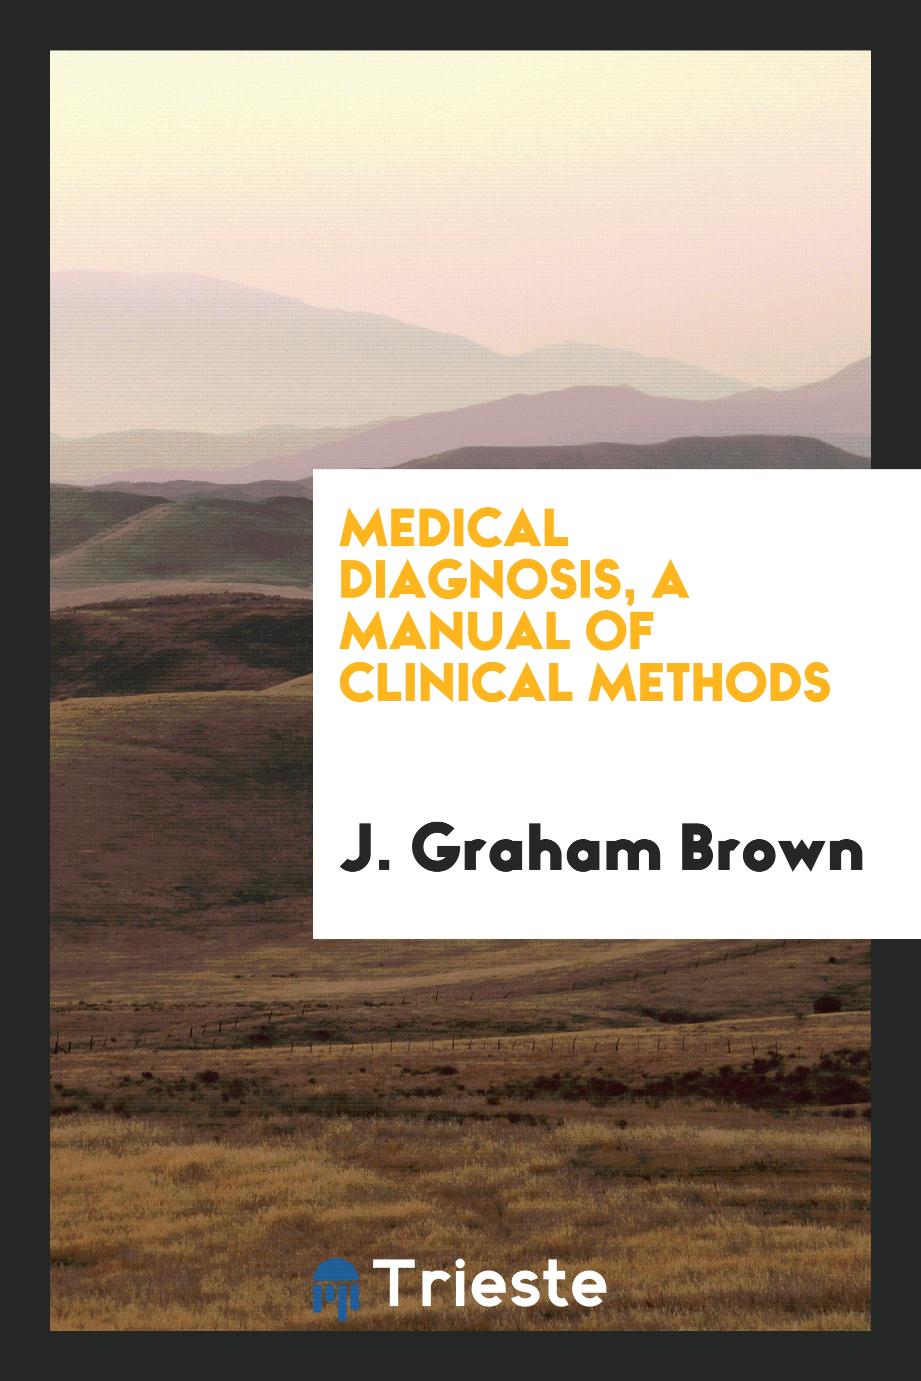 Medical diagnosis, a manual of clinical methods